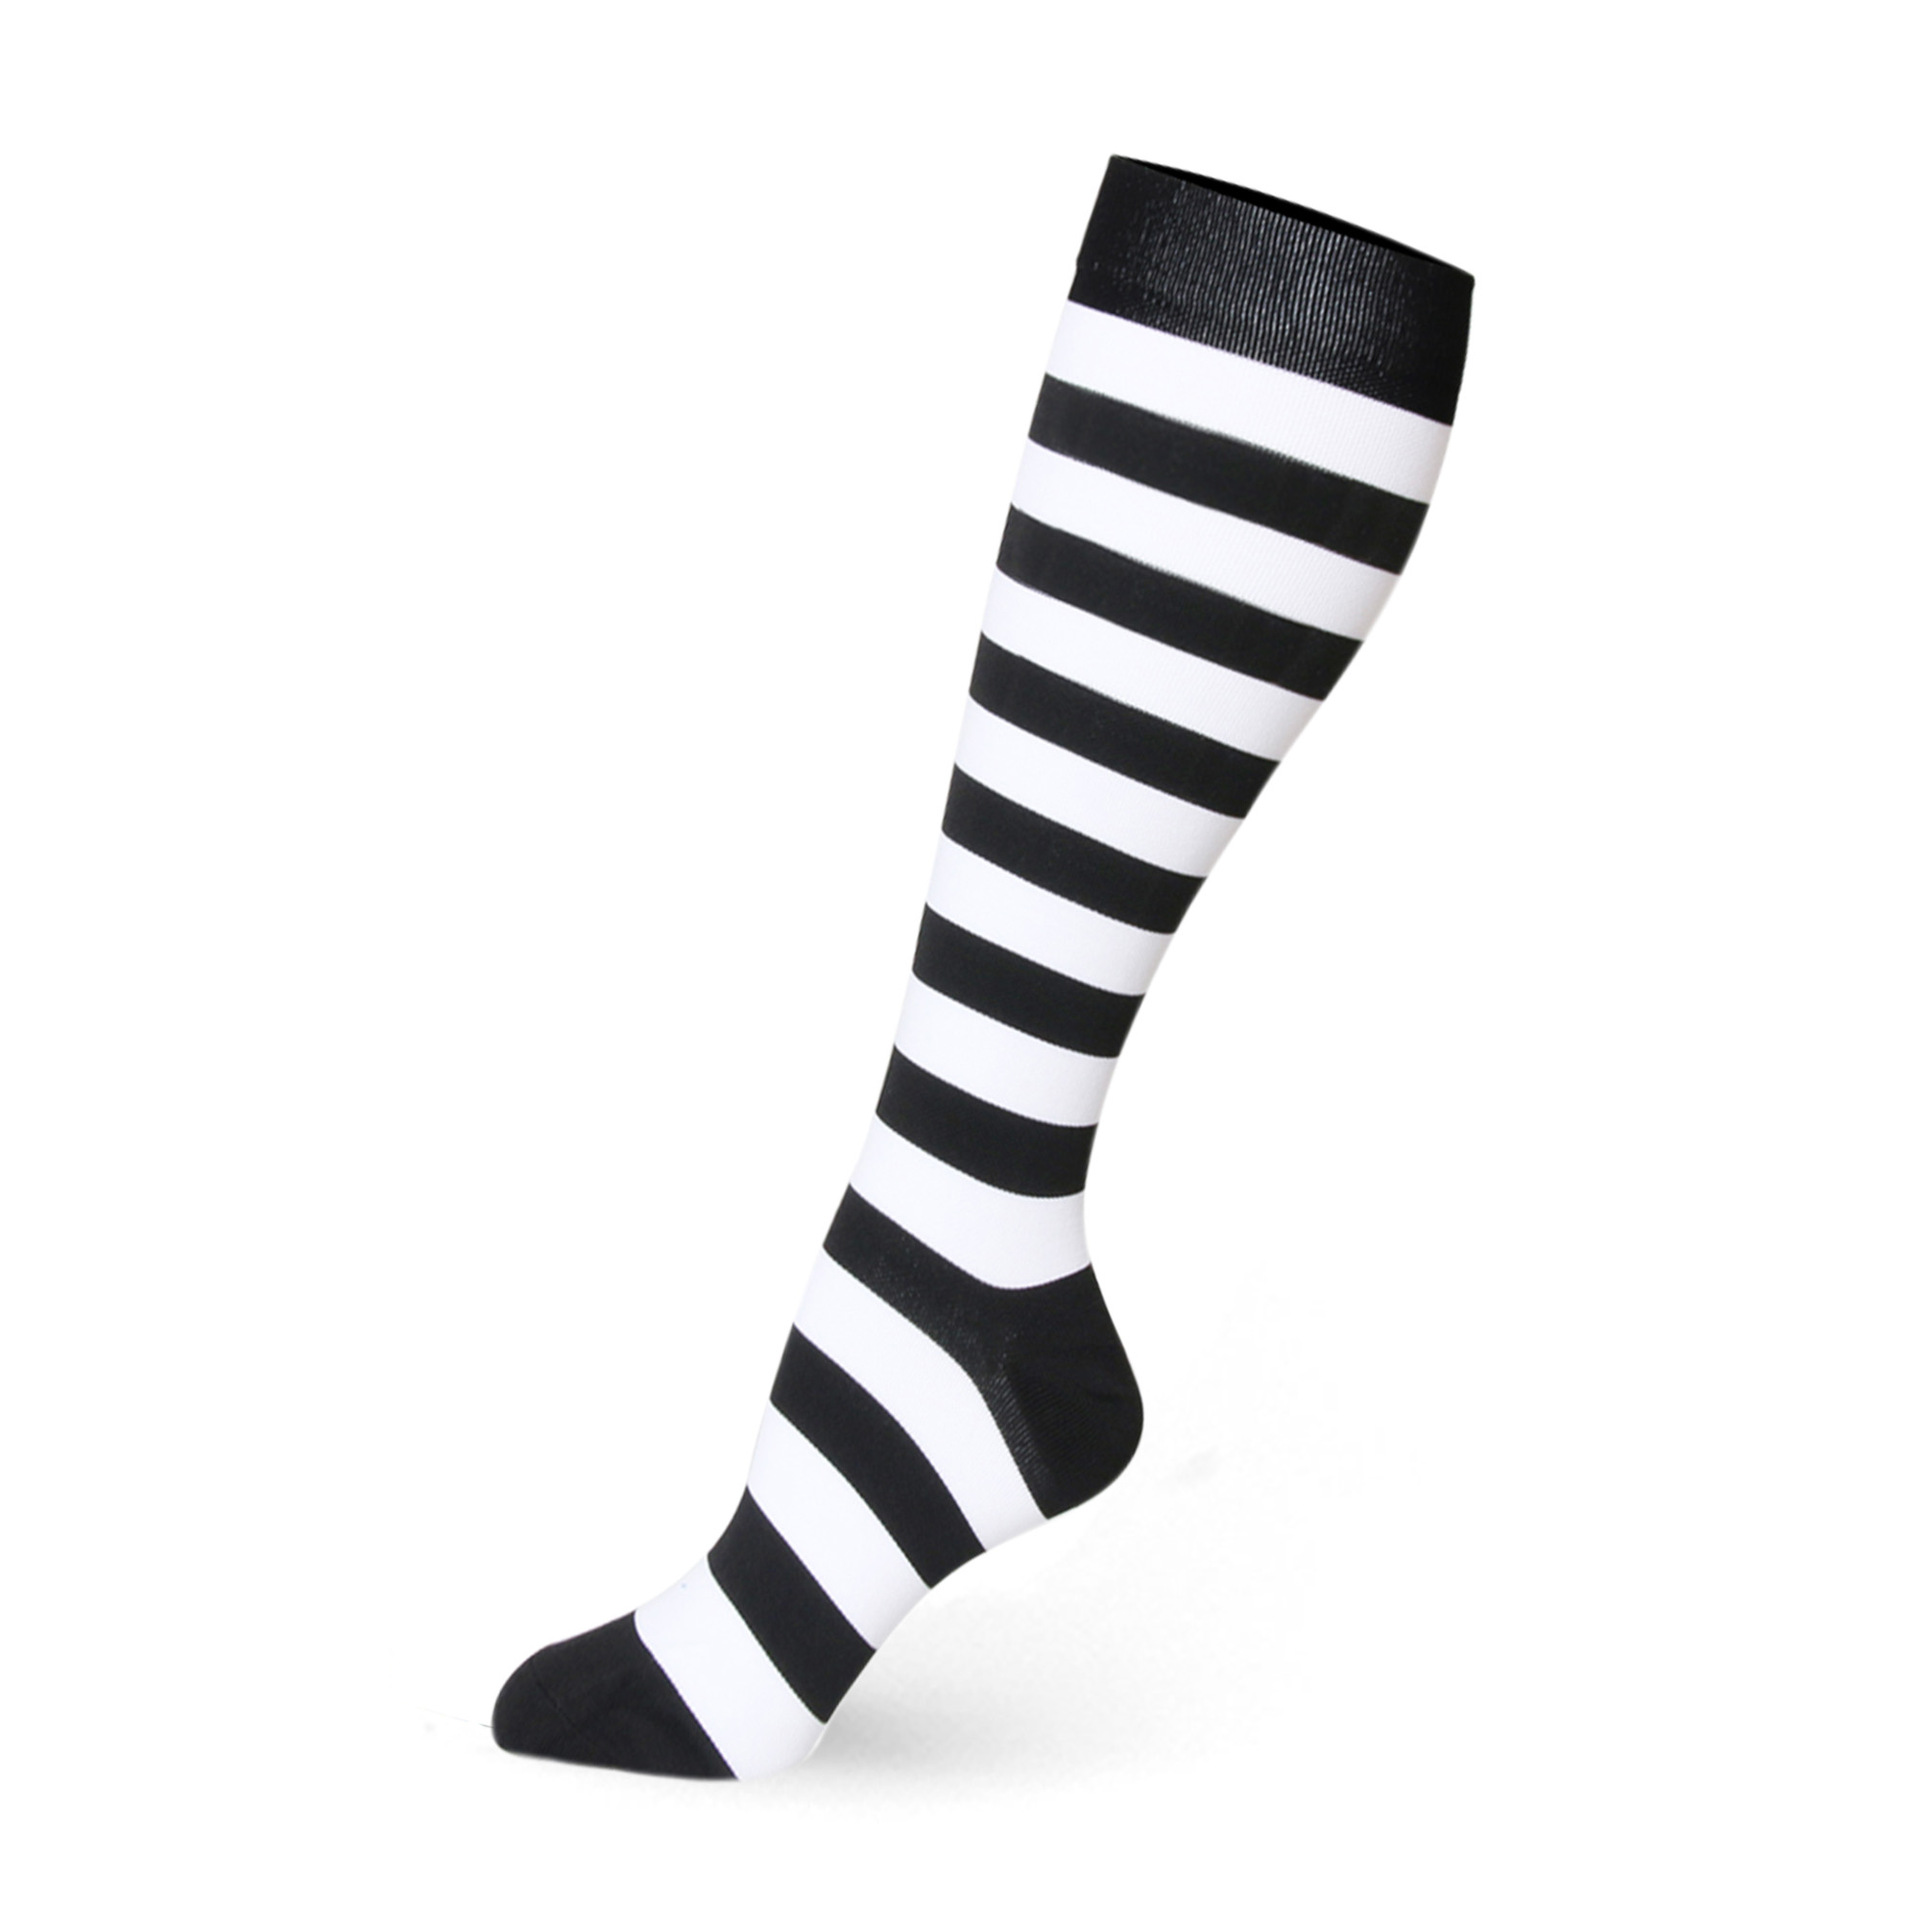 Striped Patterned Walking Sports Socks Quick Drying Breathable Leisure Socks Knee Kigh Compression Stocking for Travel Flying 15-25 mmHg